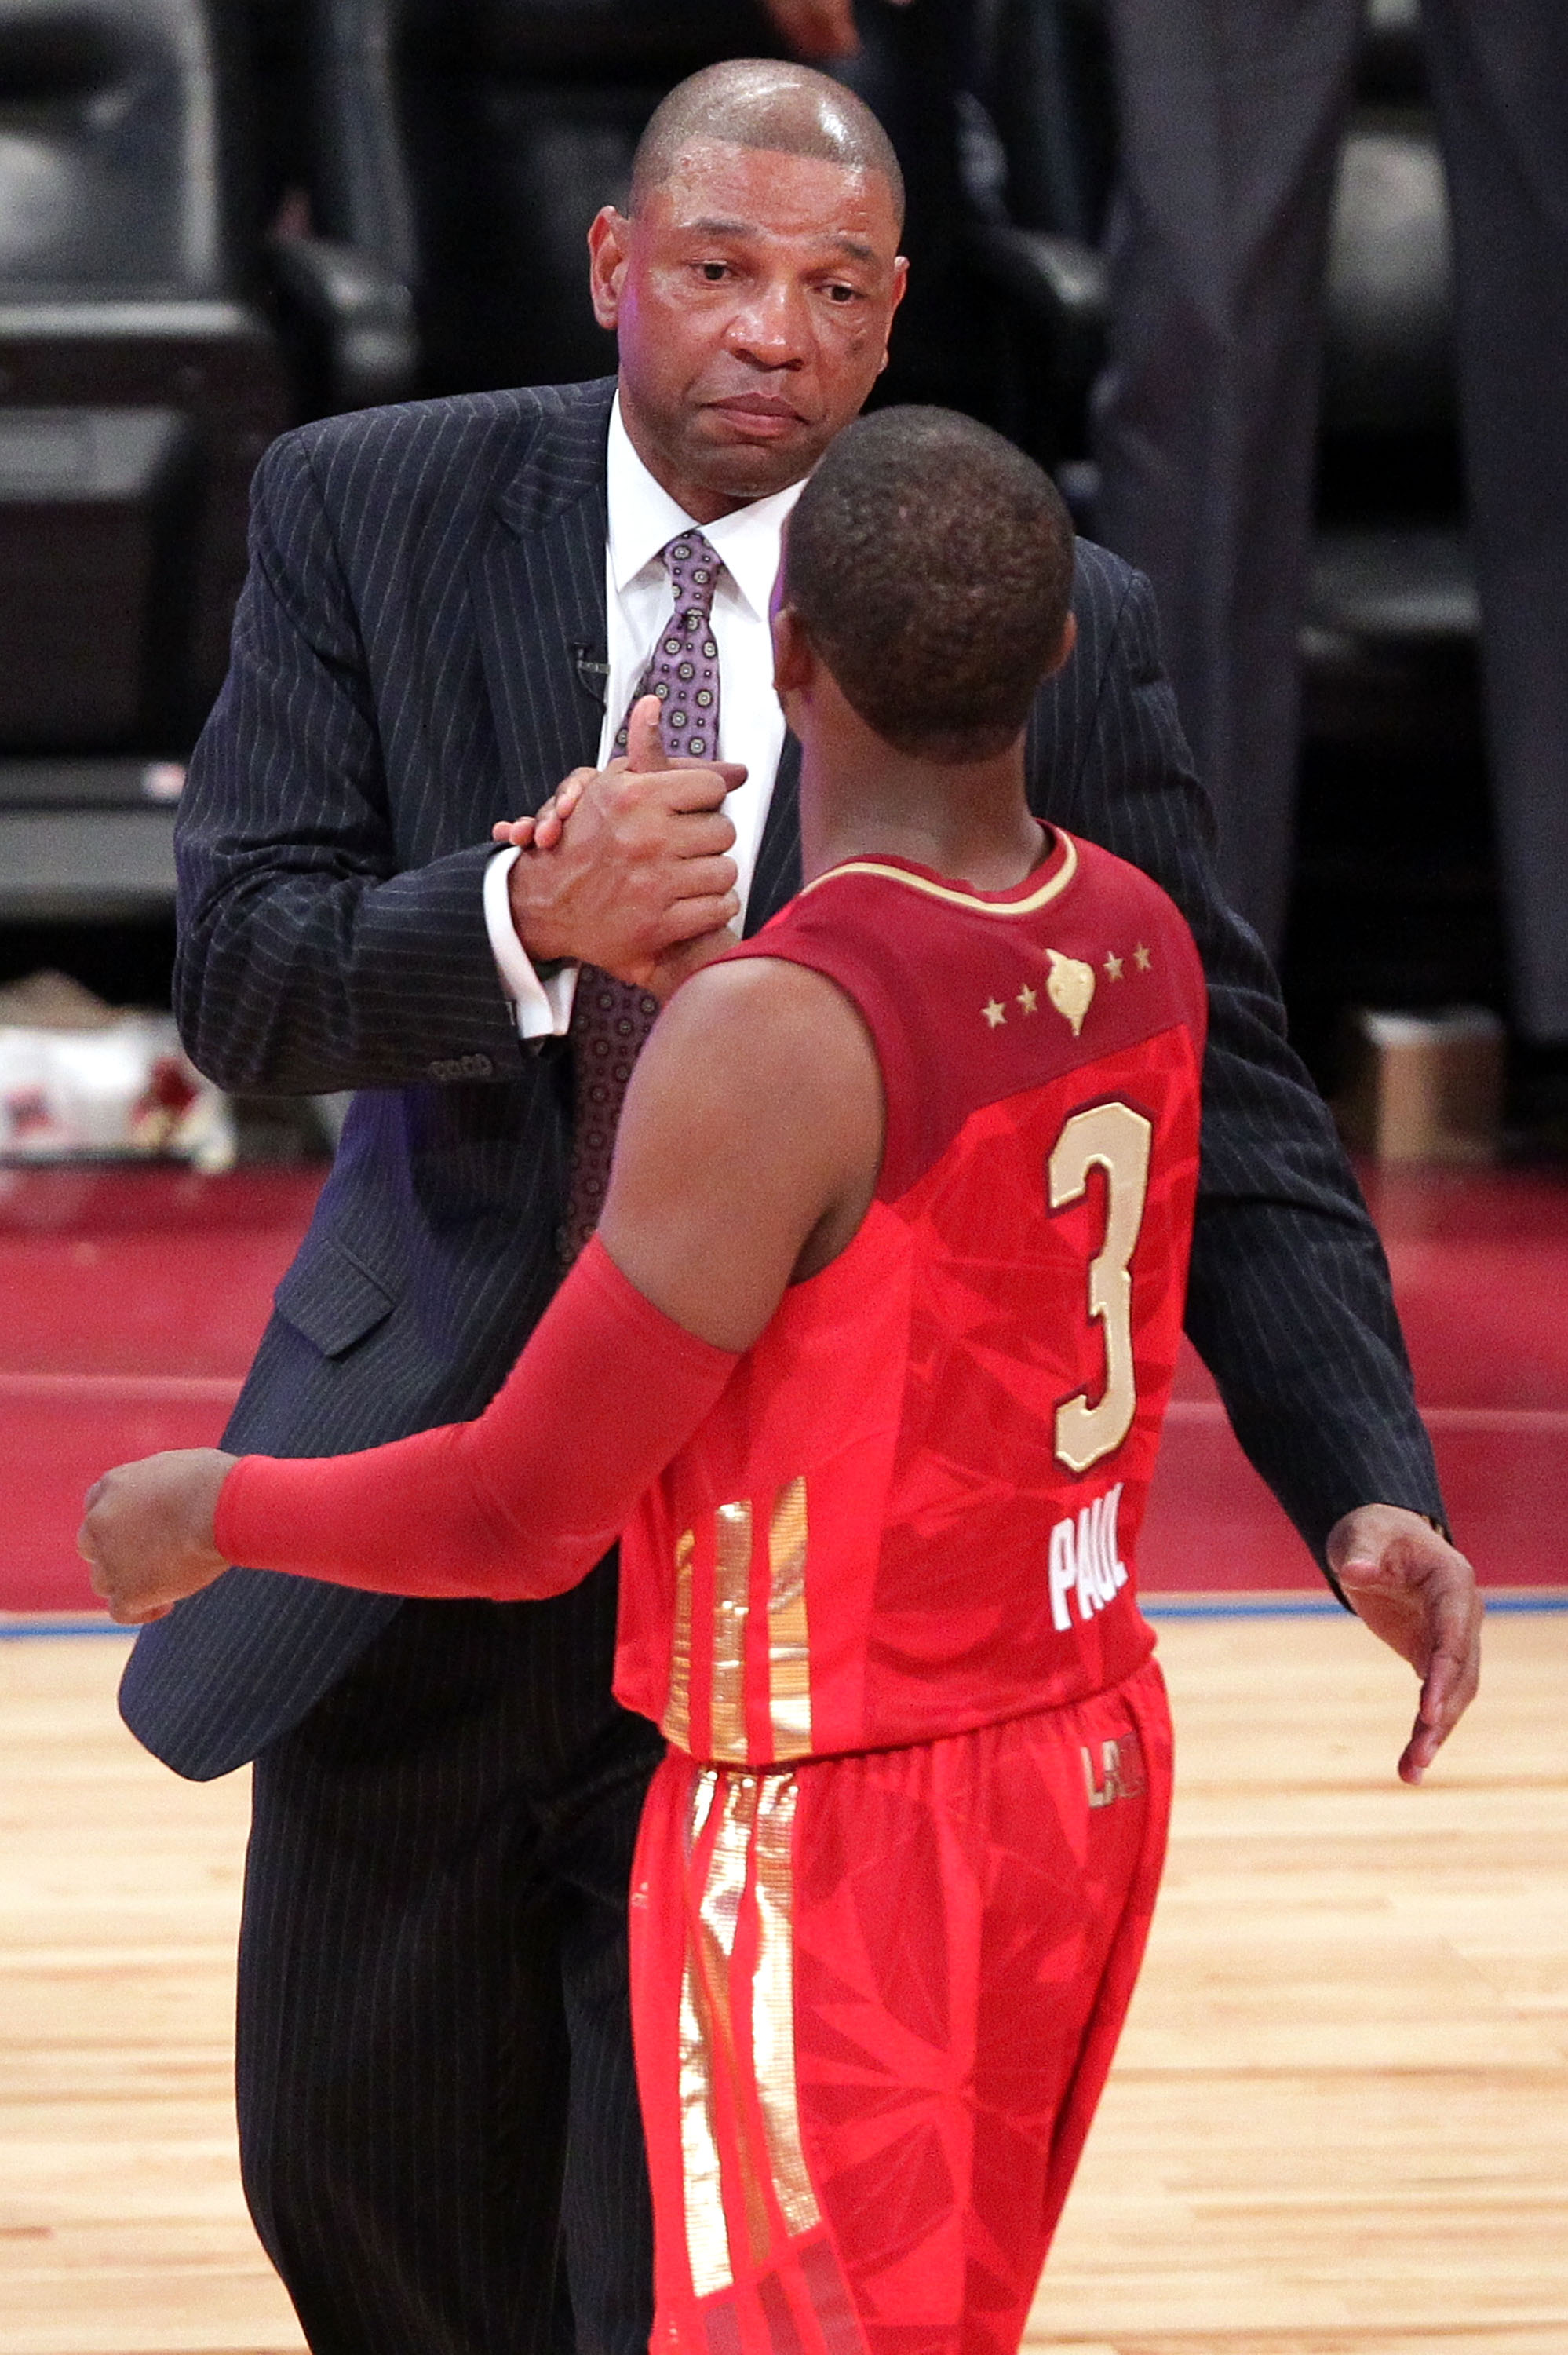 LOS ANGELES, CA - FEBRUARY 20:  Head coach Doc Rivers shakes hands with Chris Paul #3 of the New Orleans Hornets and the Western Conference after the 2011 NBA All-Star Game at Staples Center on February 20, 2011 in Los Angeles, California. NOTE TO USER: U